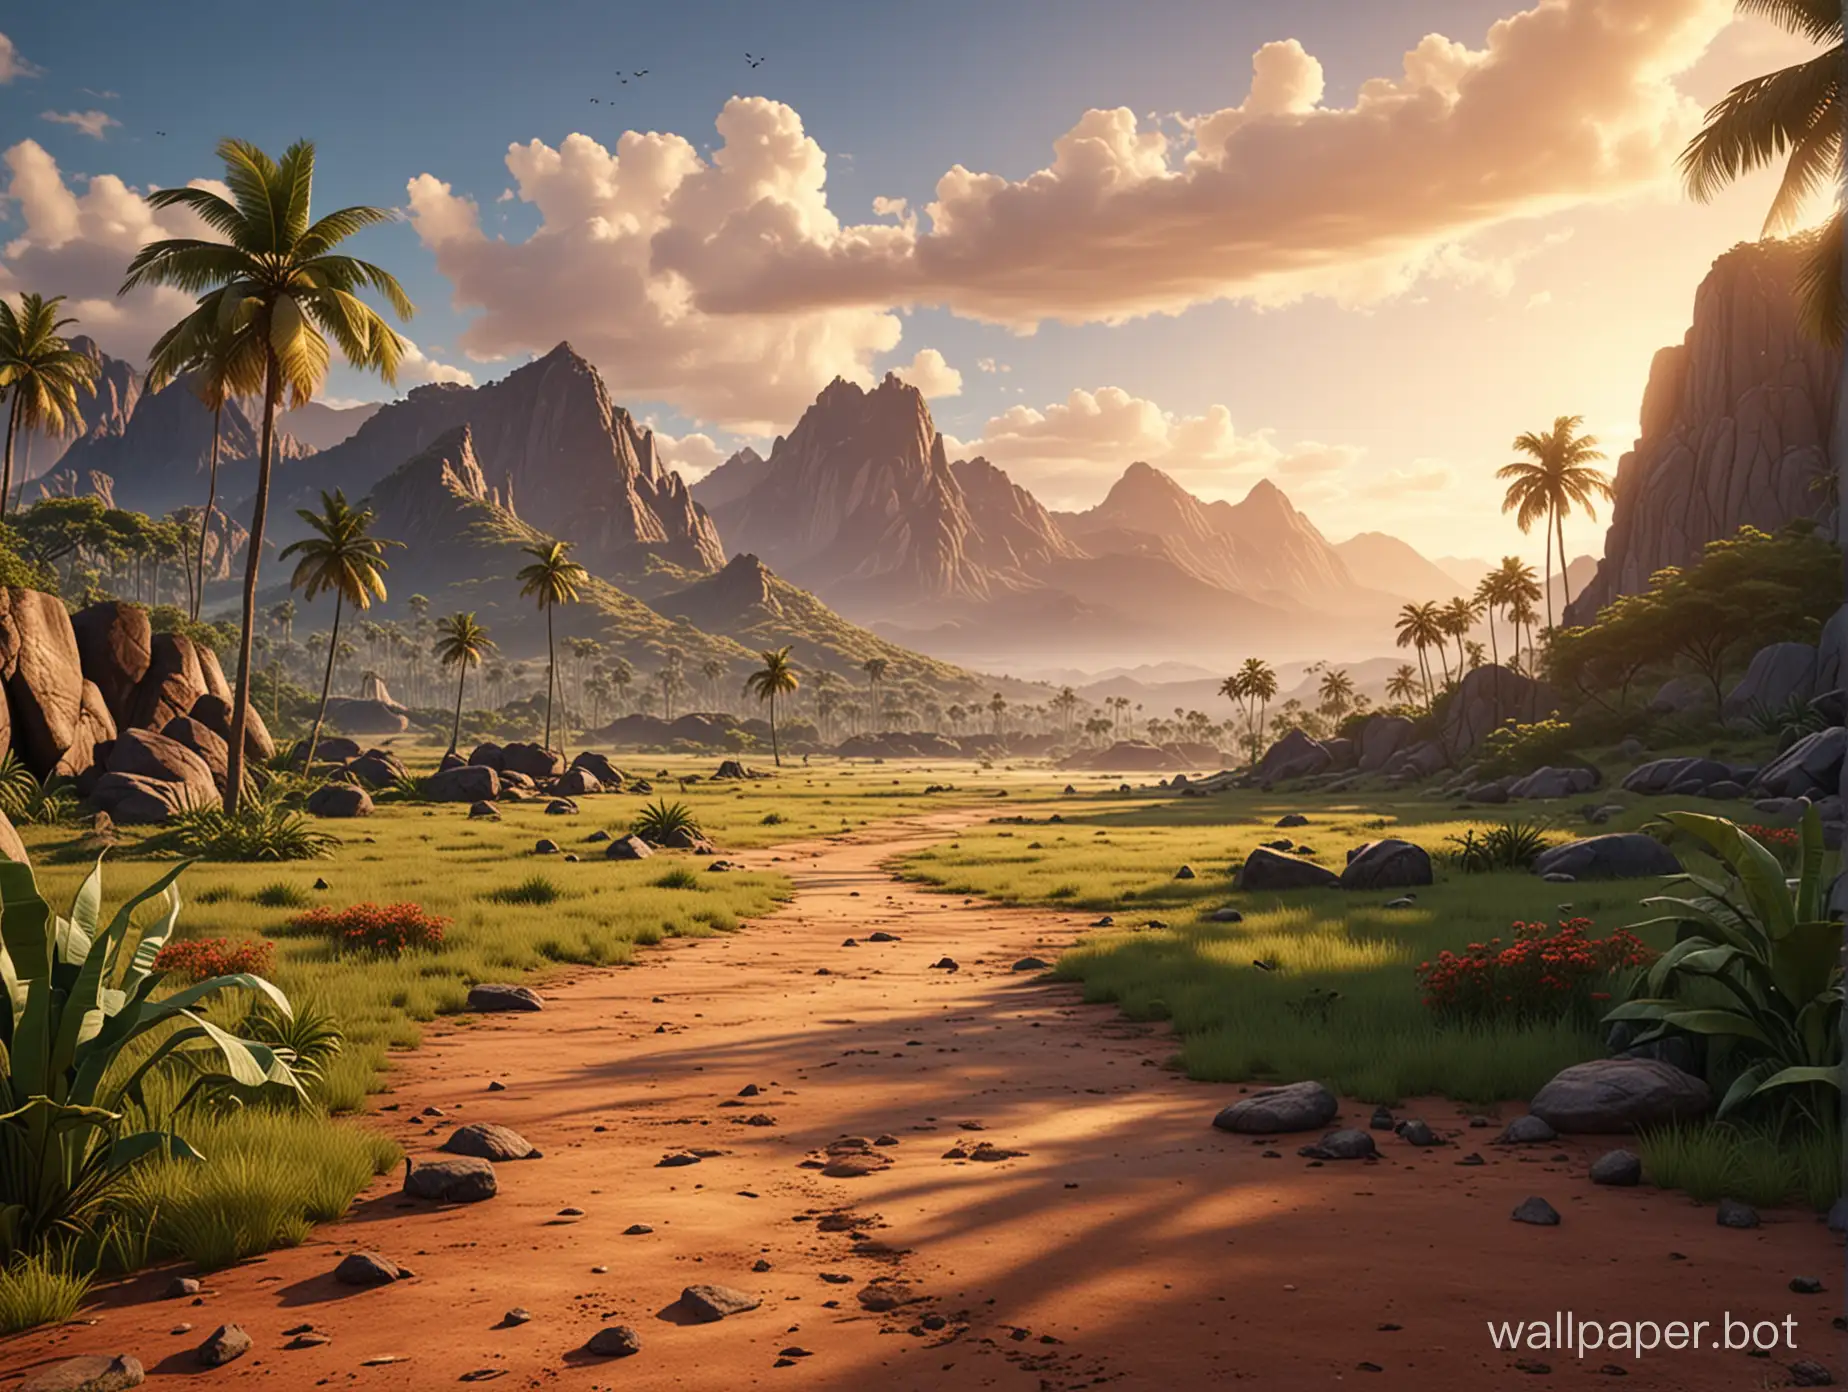 Scenery from the tropical world, flat empty ground in front high elevation, looking mountains in the background, realistic and highly detailed, Disney style, cinematic mood